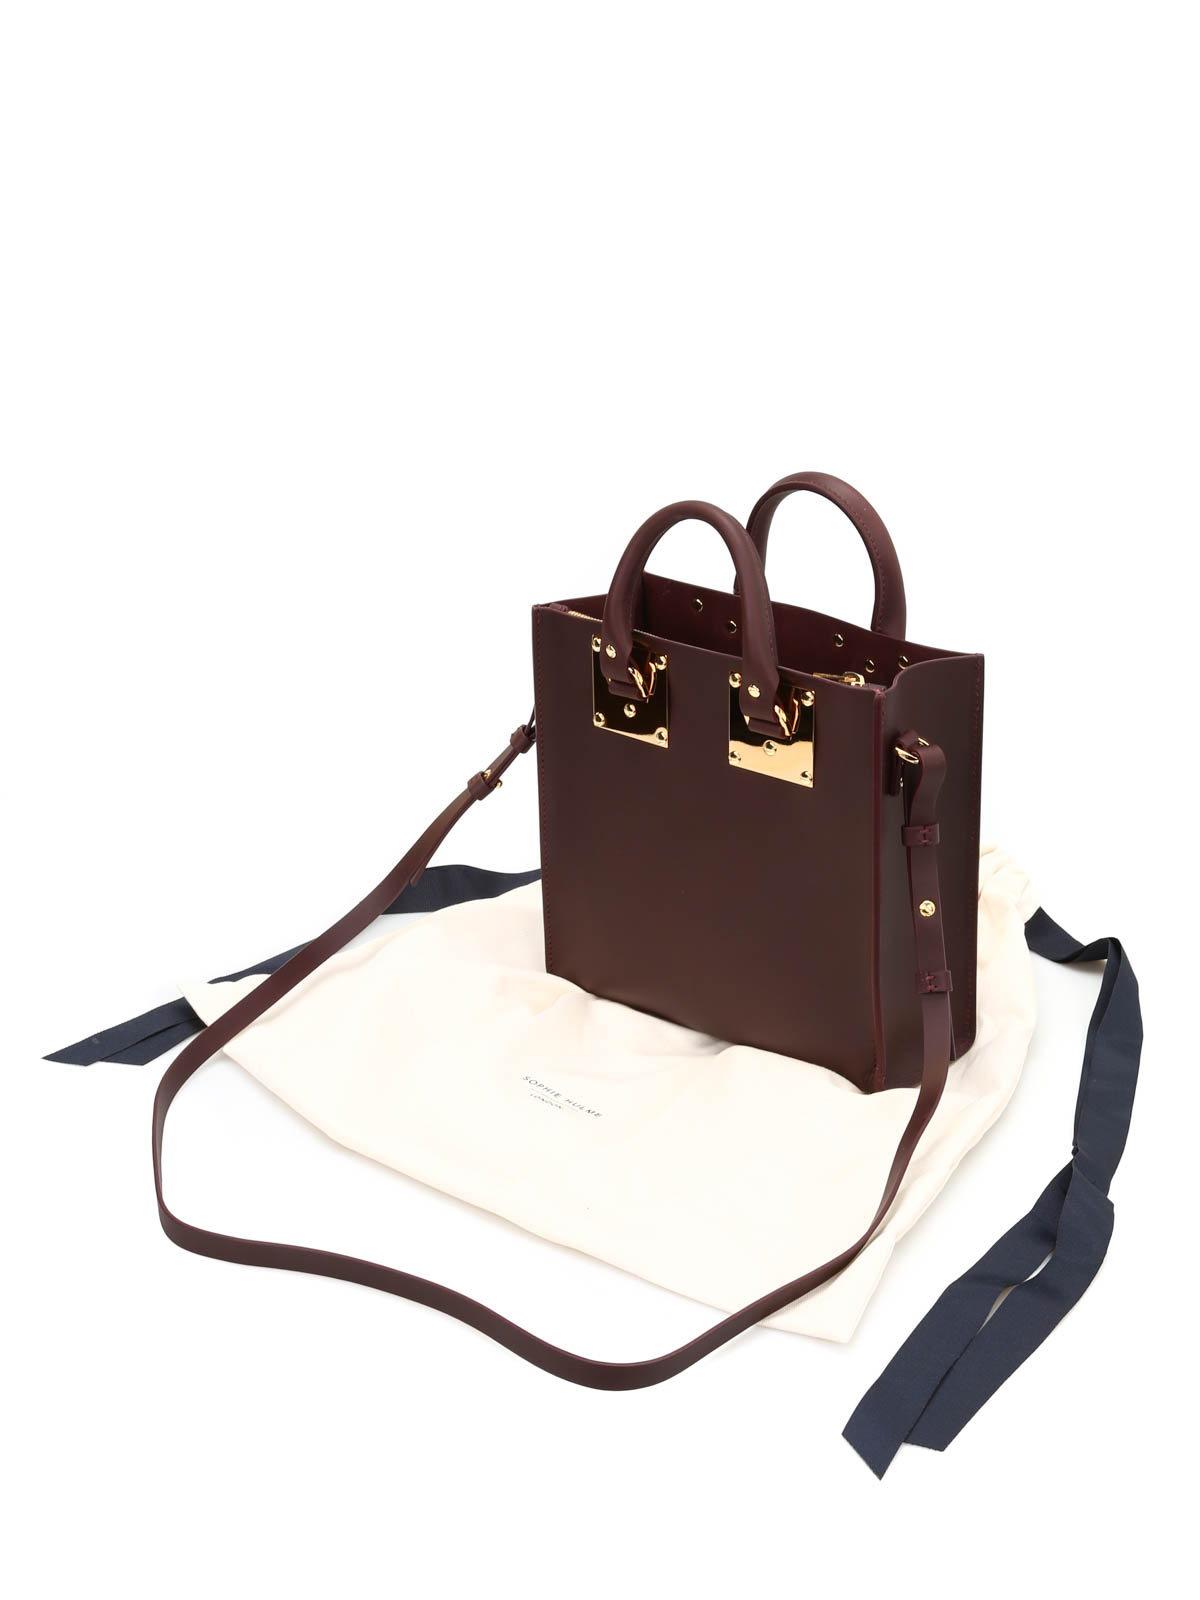 sophie hulme albion square tote 2way - ハンドバッグ